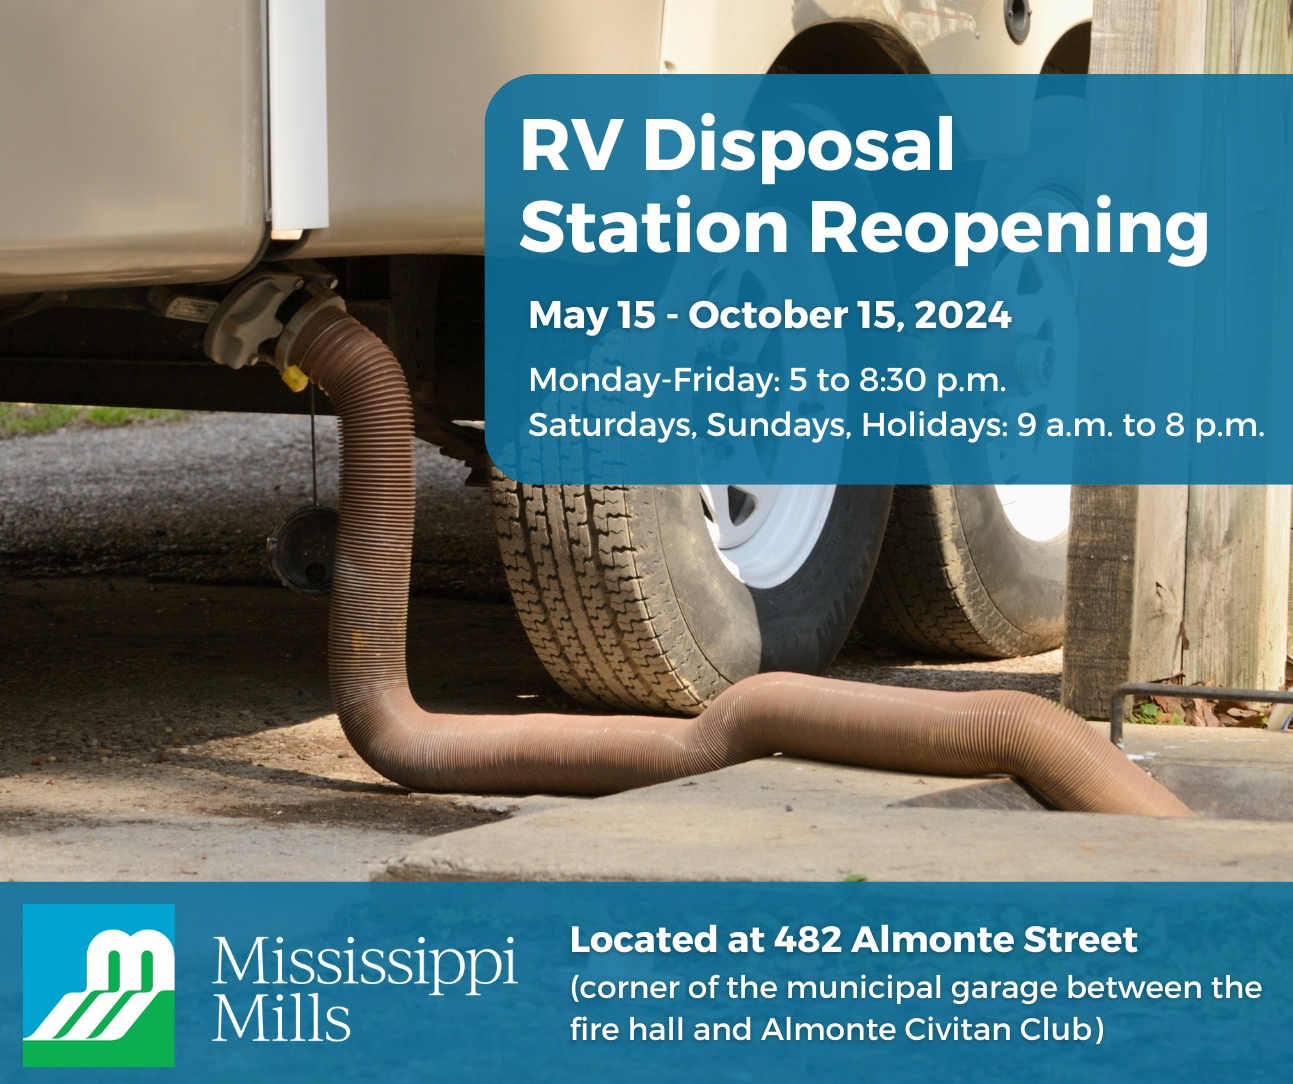 Blue graphic with white lettering reading 'RV Disposal Station Reopening' and a photo of a recreation vehicle's holding tank being pumped